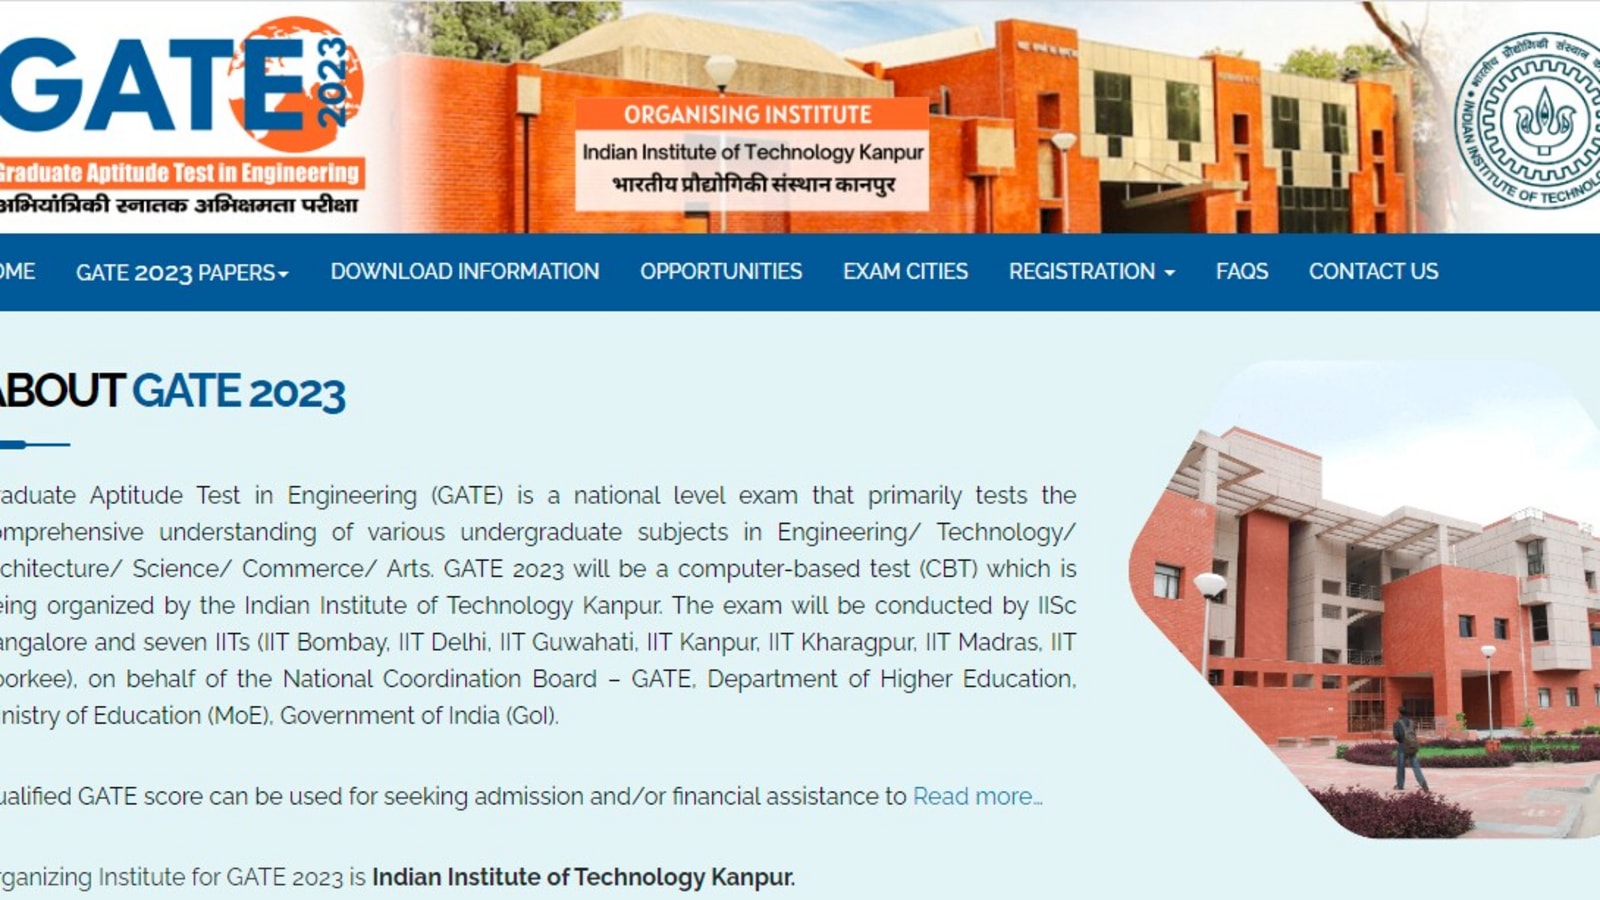 IIT Kanpur invites applications for third cohort of eMasters programmes  starting in Jan 2023 - India Today